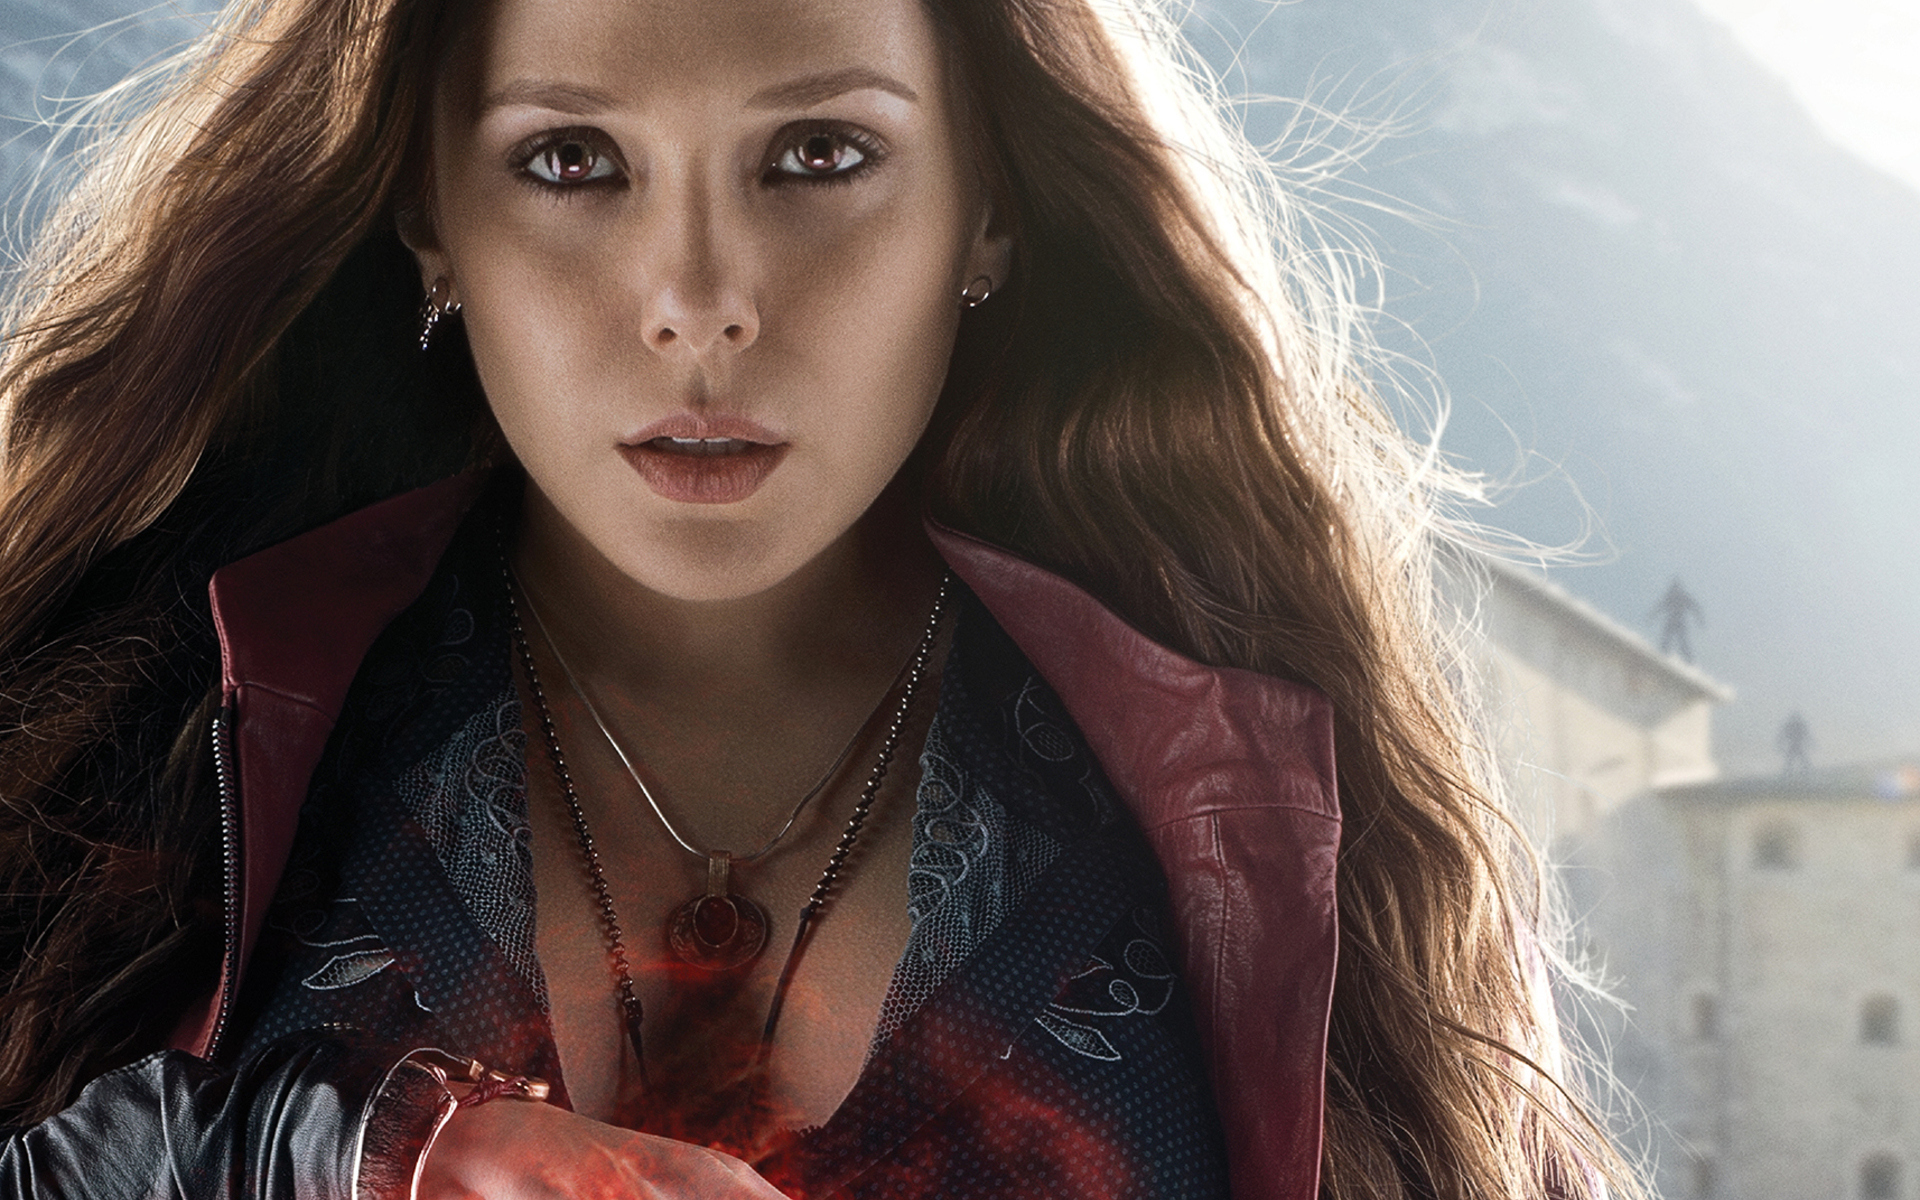 magic, avengers, scarlet witch, earrings, elizabeth olsen, long hair, movie, avengers: age of ultron, necklace, red eyes, redhead, the avengers